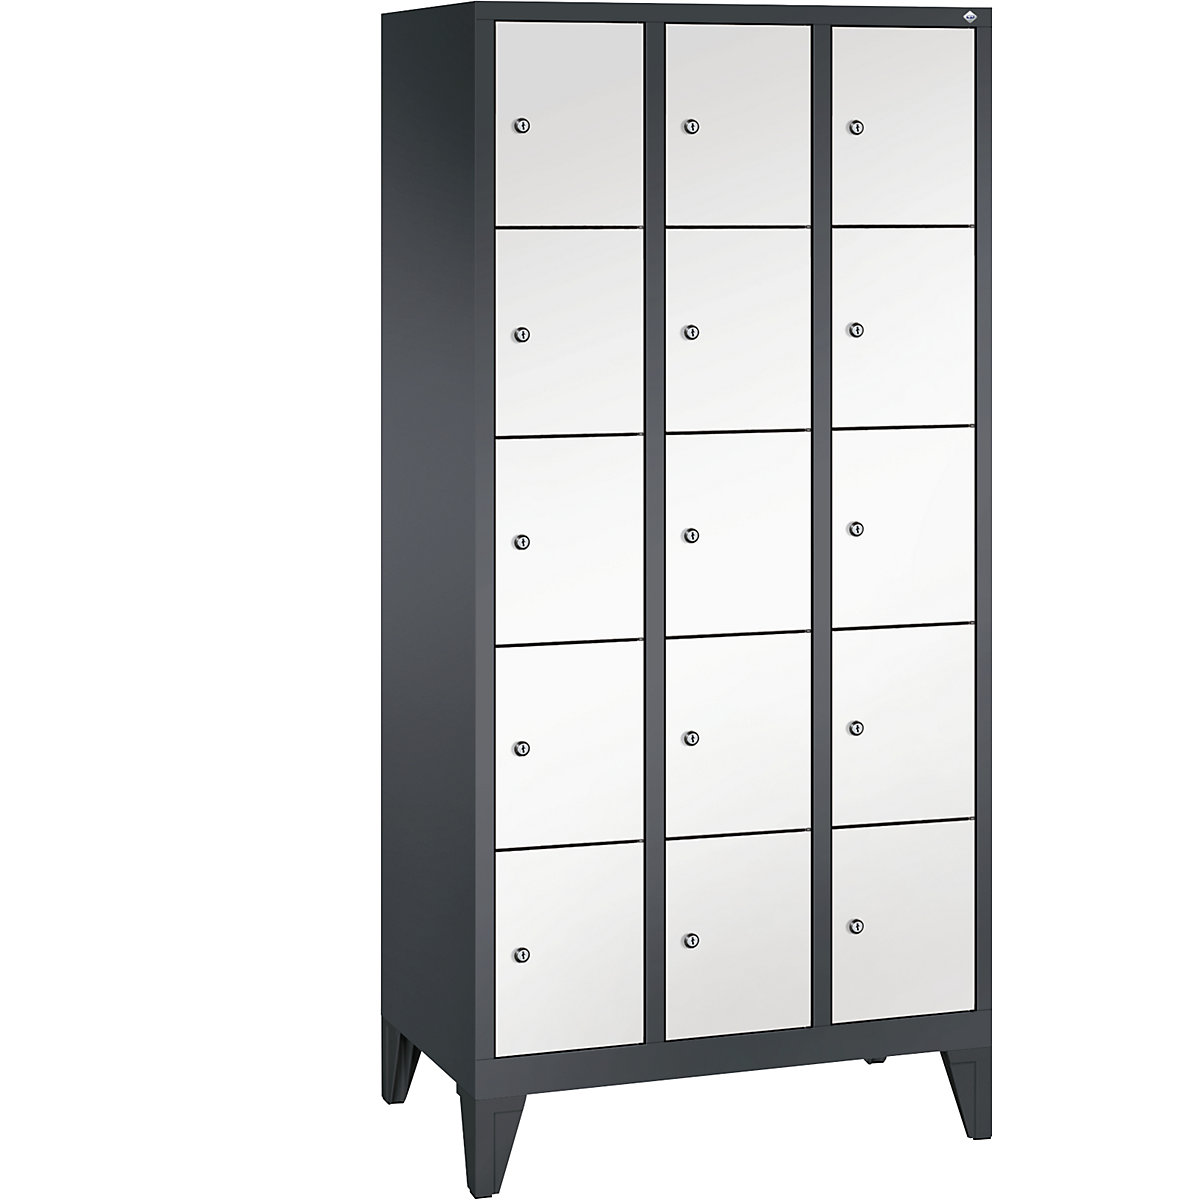 CLASSIC locker unit with feet – C+P, 3 compartments, 5 shelf compartments each, compartment width 300 mm, black grey / traffic white-14